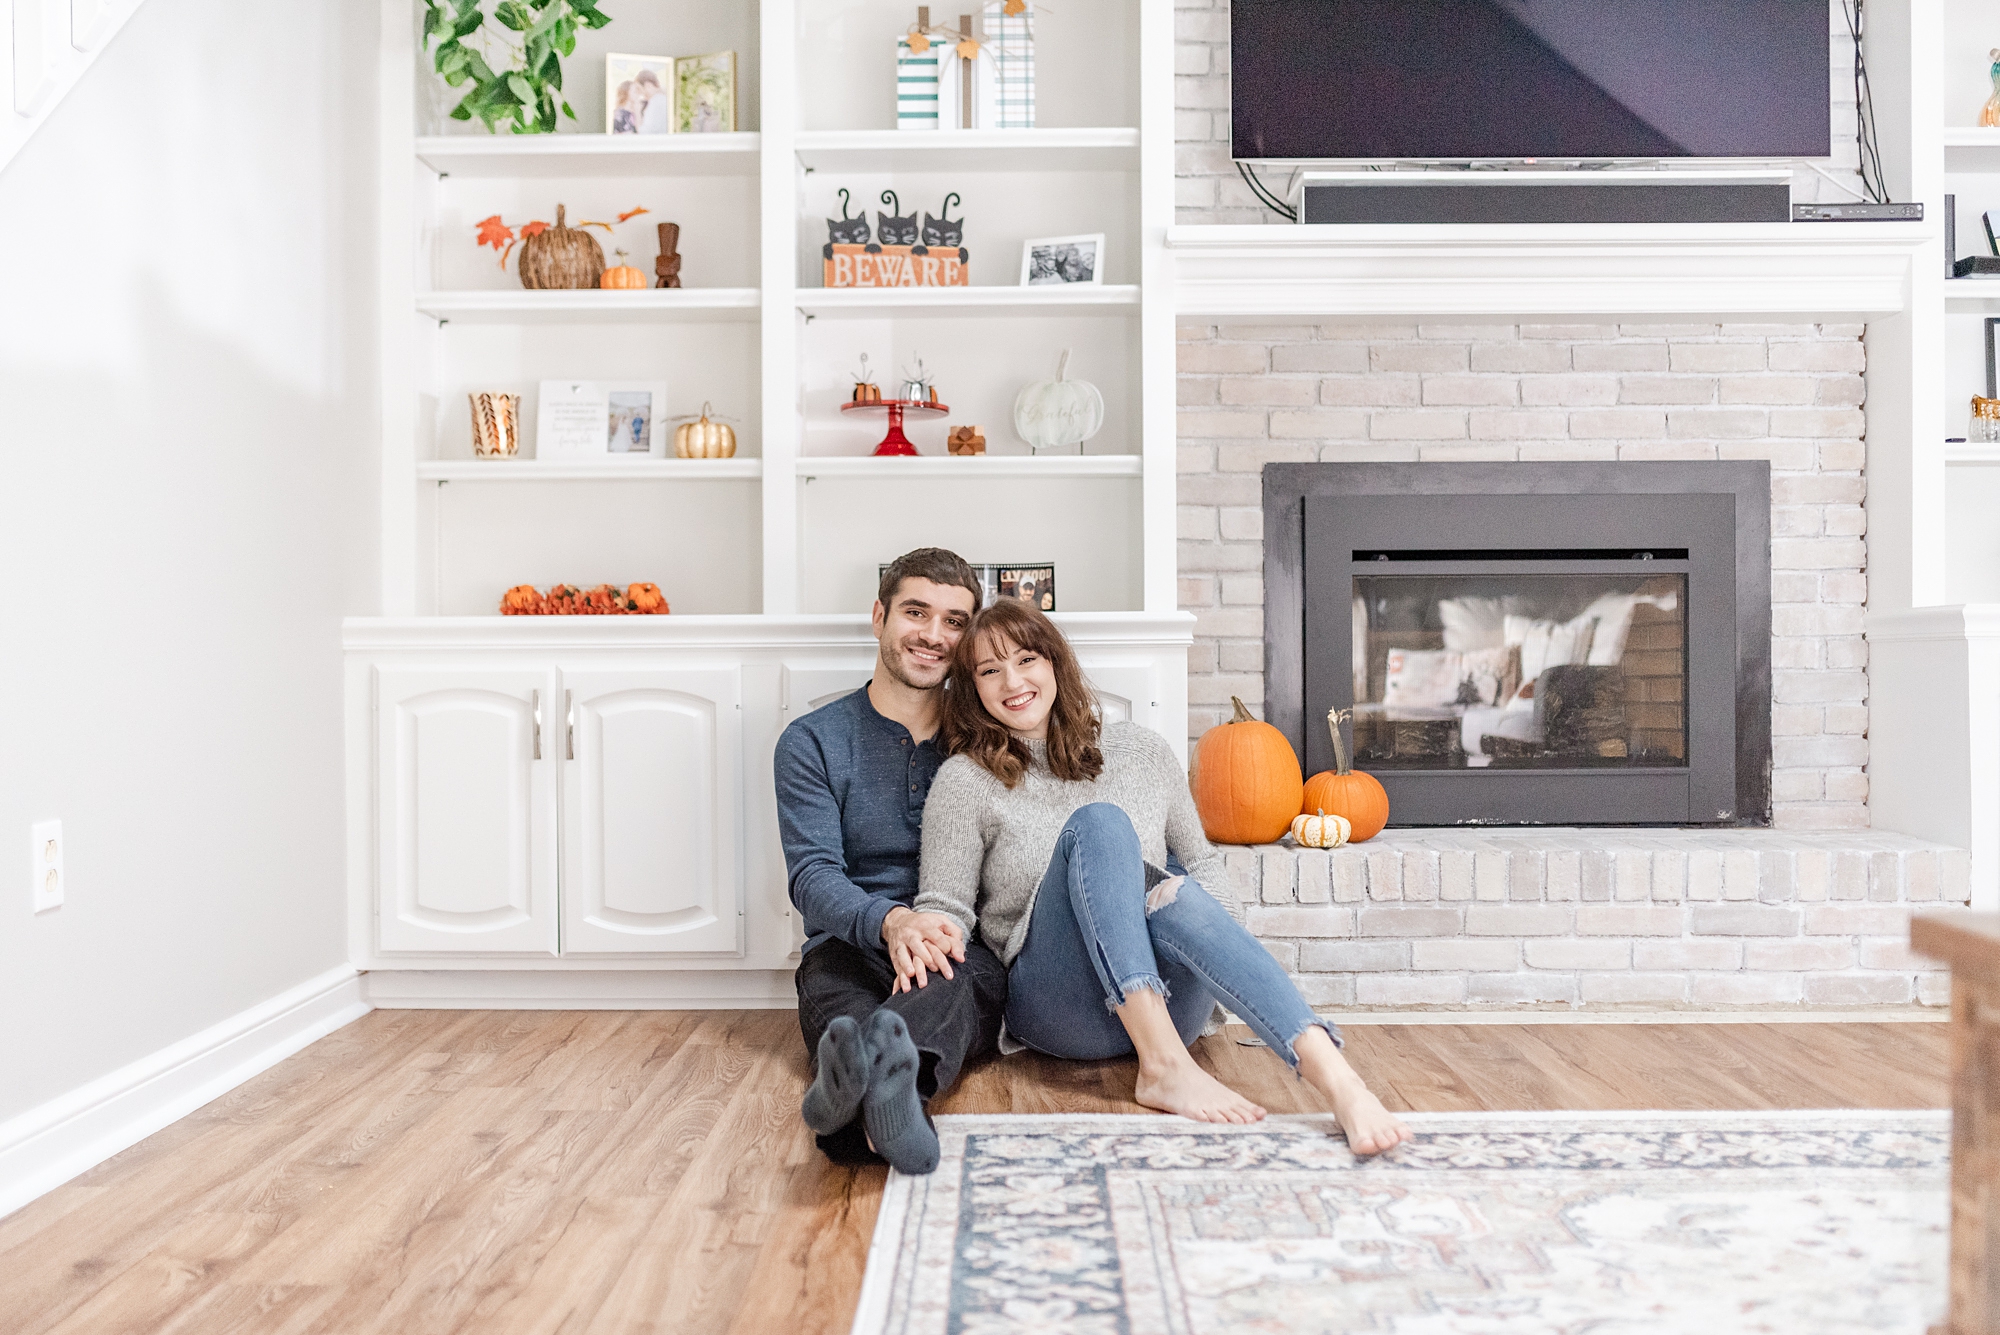 fall lifestyle portraits at home to celebrate anniversary